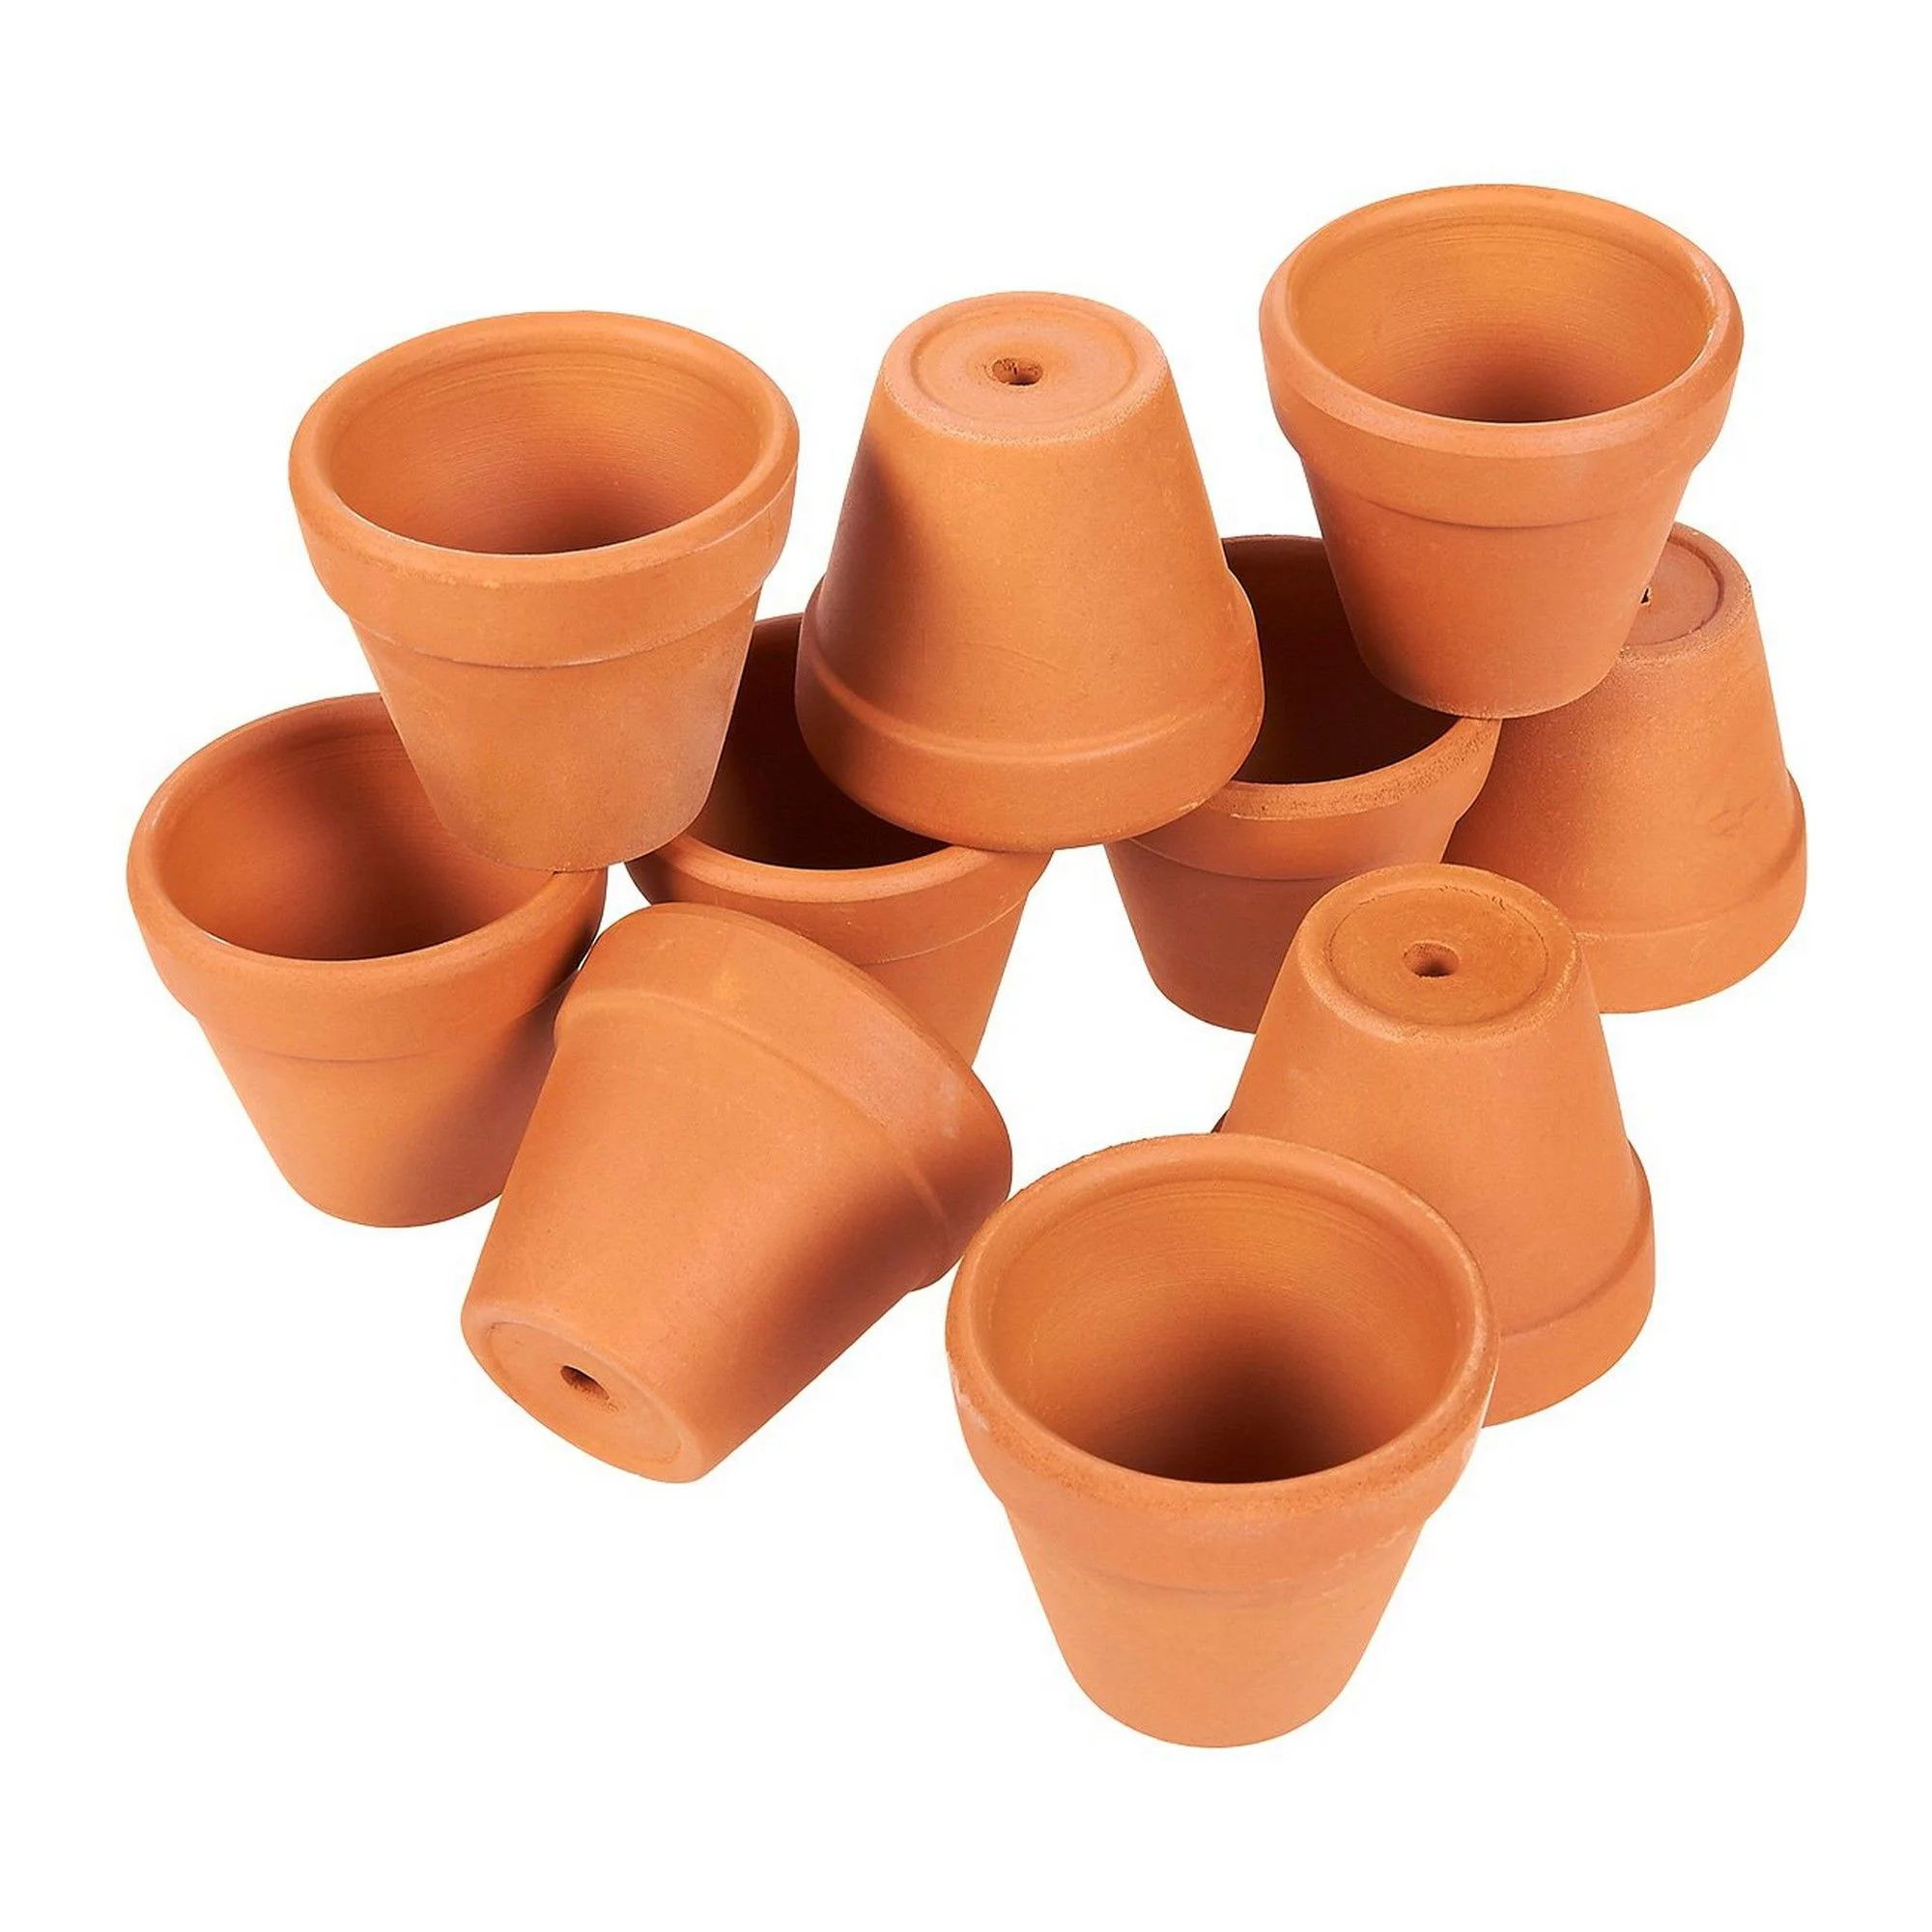 Specifications for Pots Suitable for Growing Azaleas